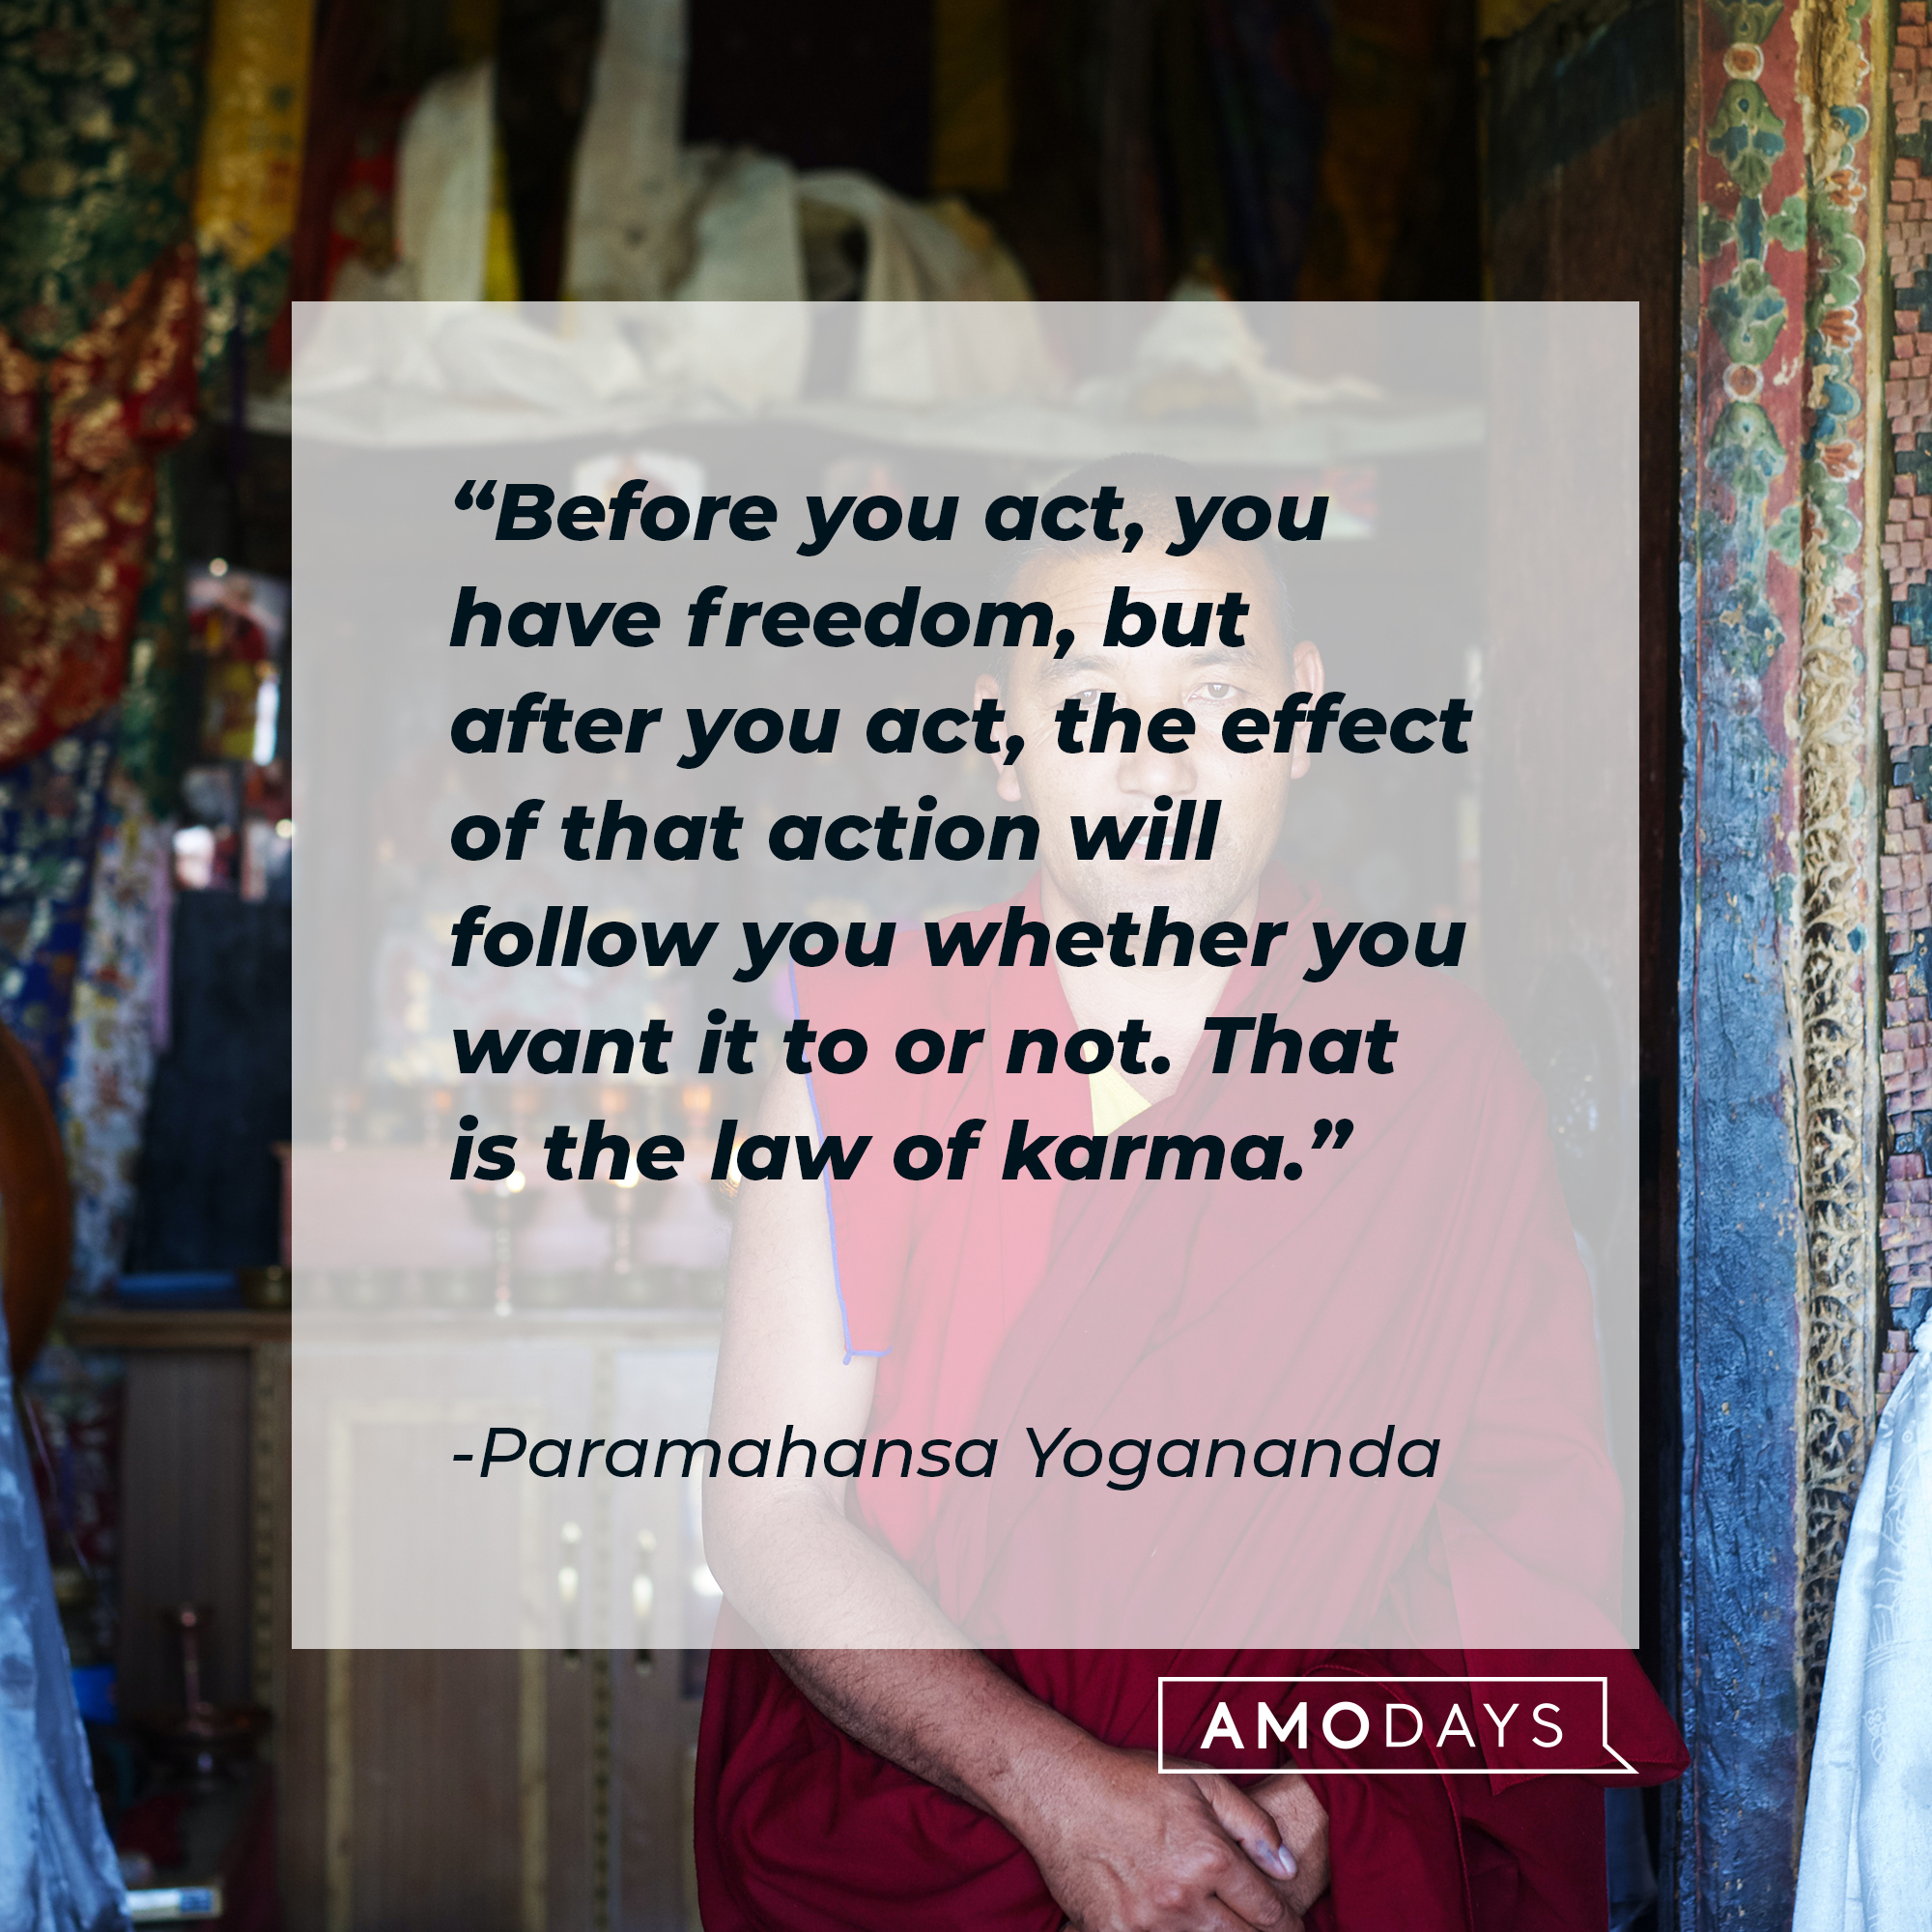 Paramahansa Yogananda's quote: "Before you act, you have freedom, but after you act, the effect of that action will follow you whether you want it to or not. That is the law of karma." | Image: AmoDays